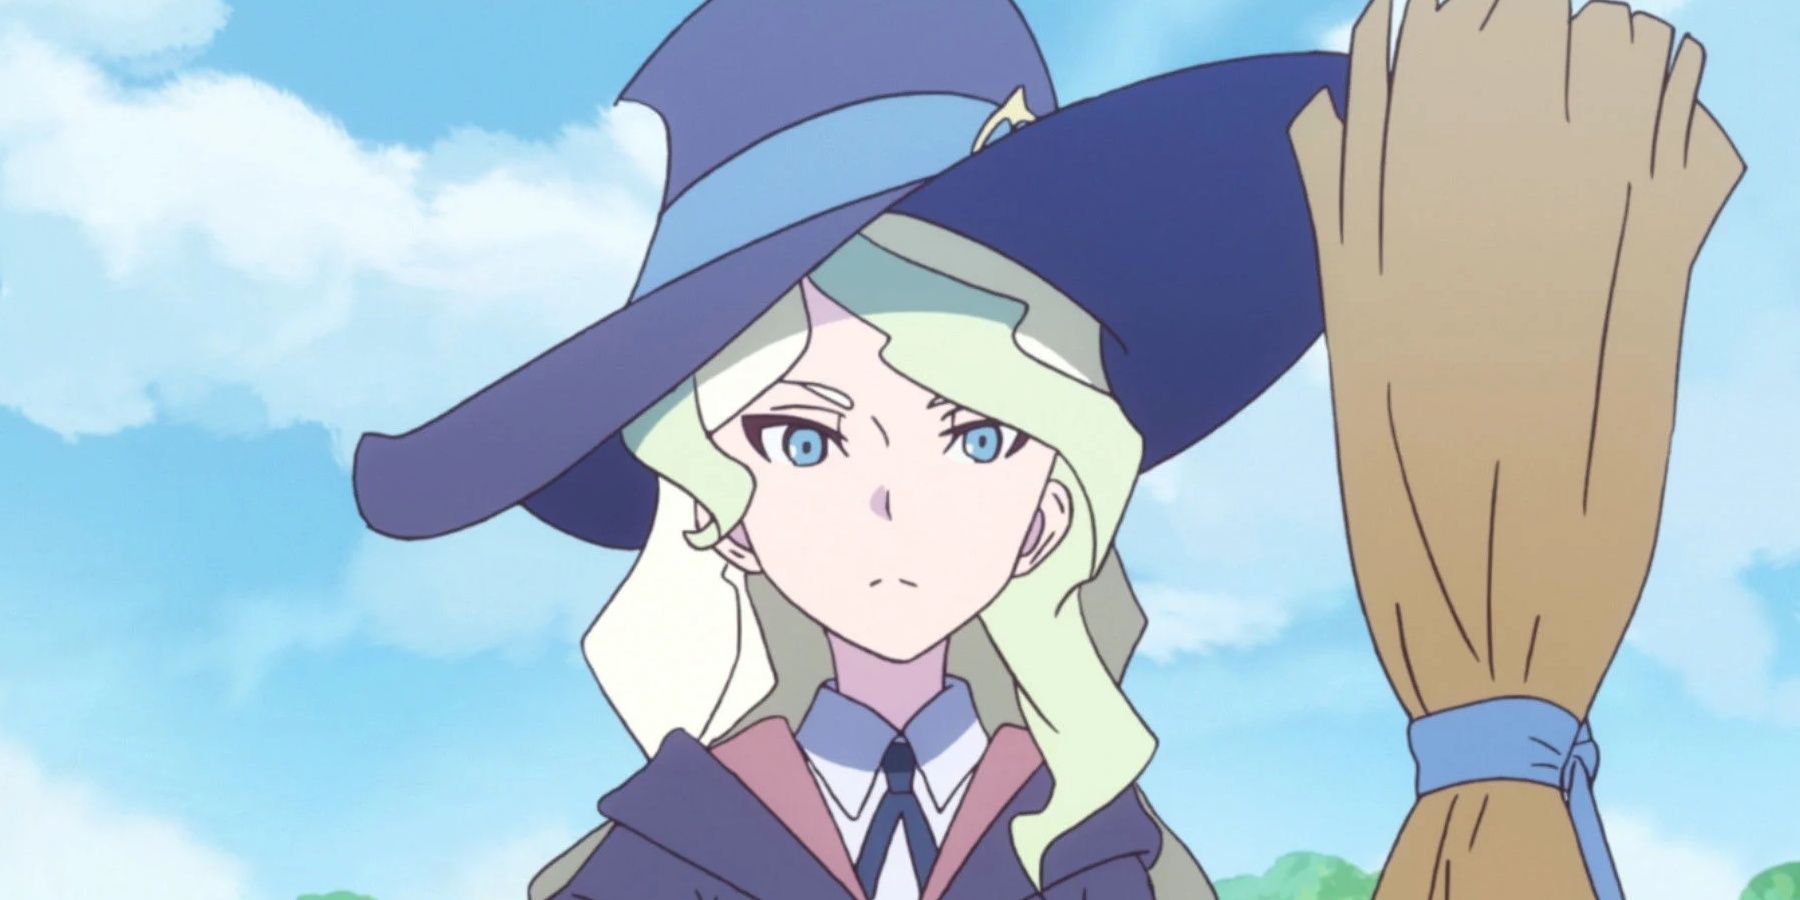 Diana wearing a witch's hatr and holding a broom in Little Witch Academia